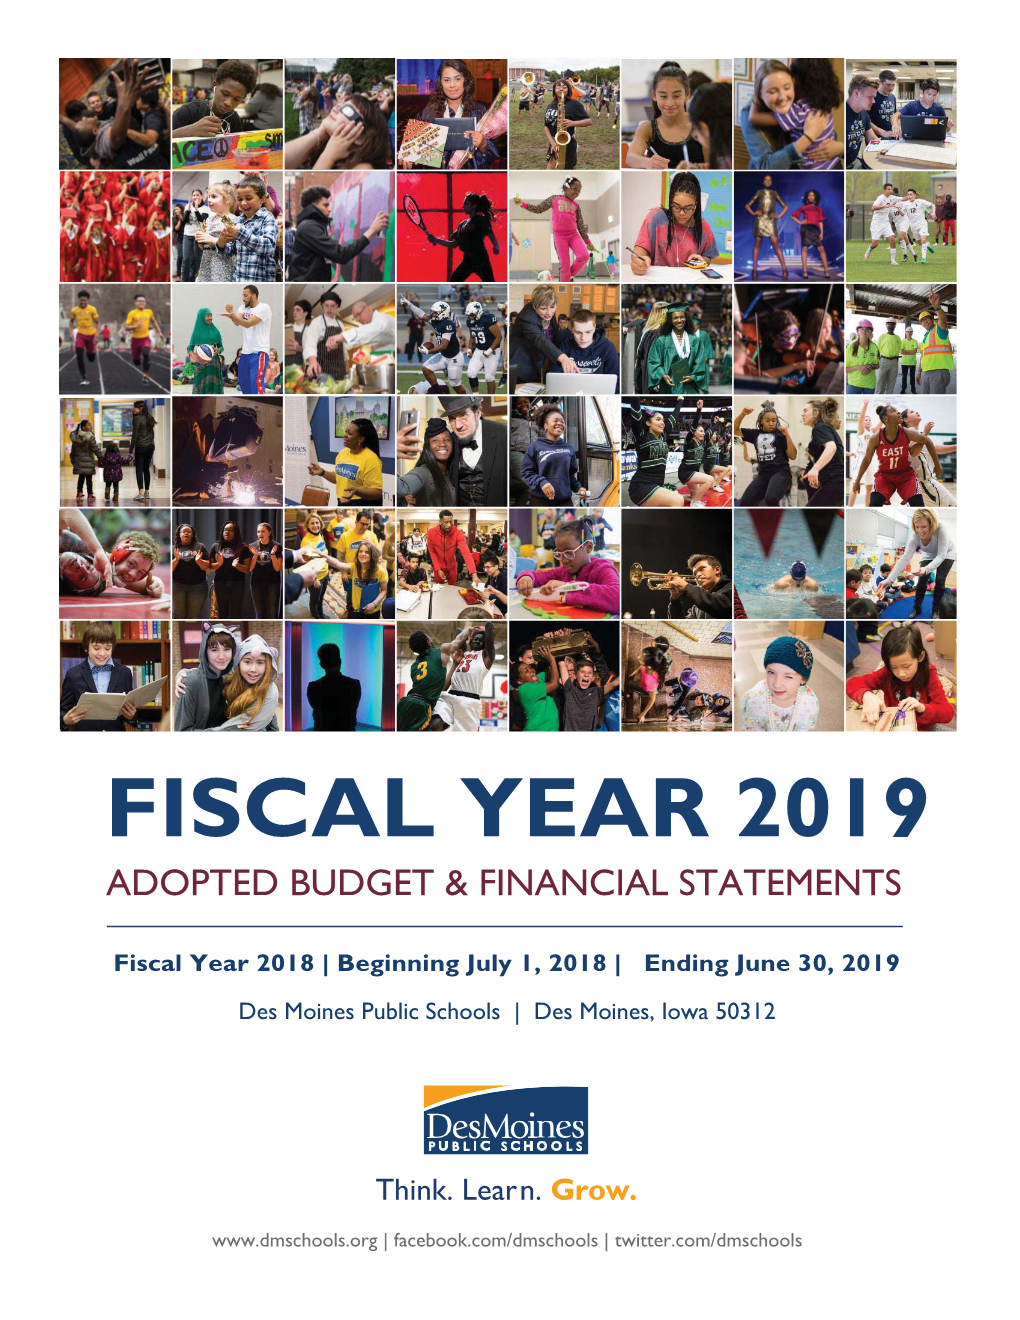 Fiscal Year 2019 Adopted Budget & Financial Statements